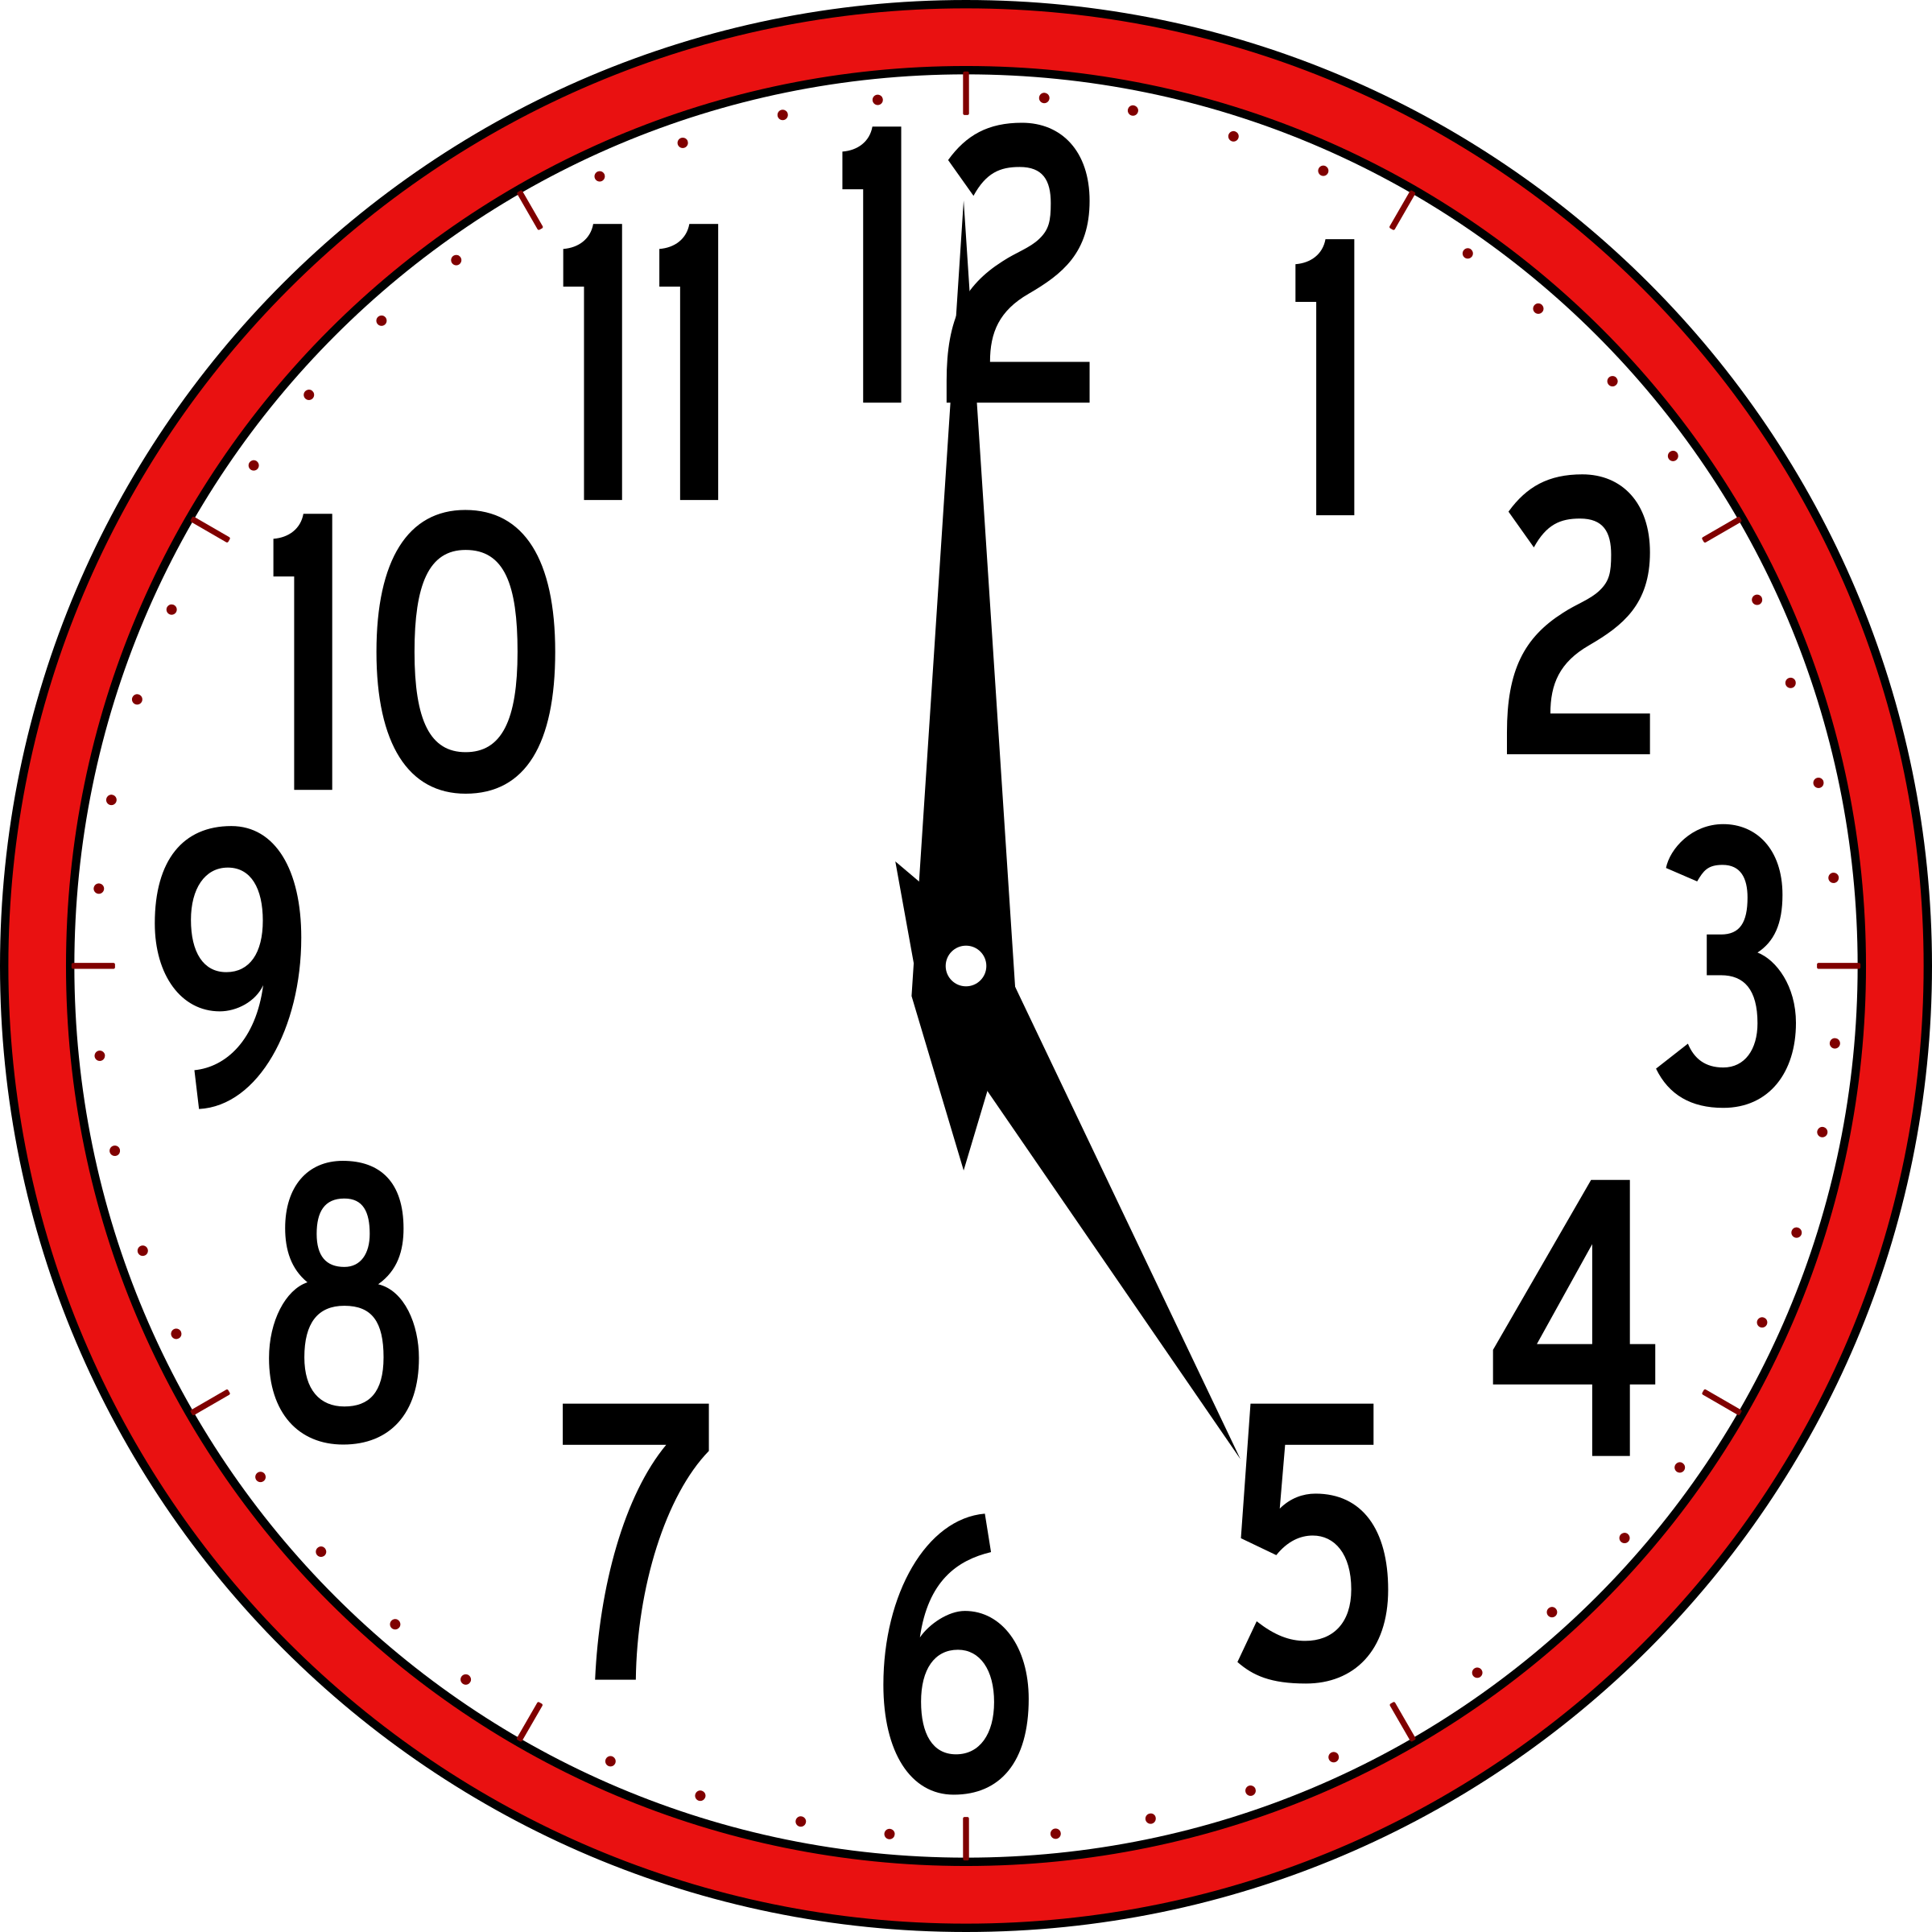 Clock clip art black and white free clipart images - Cliparting.com